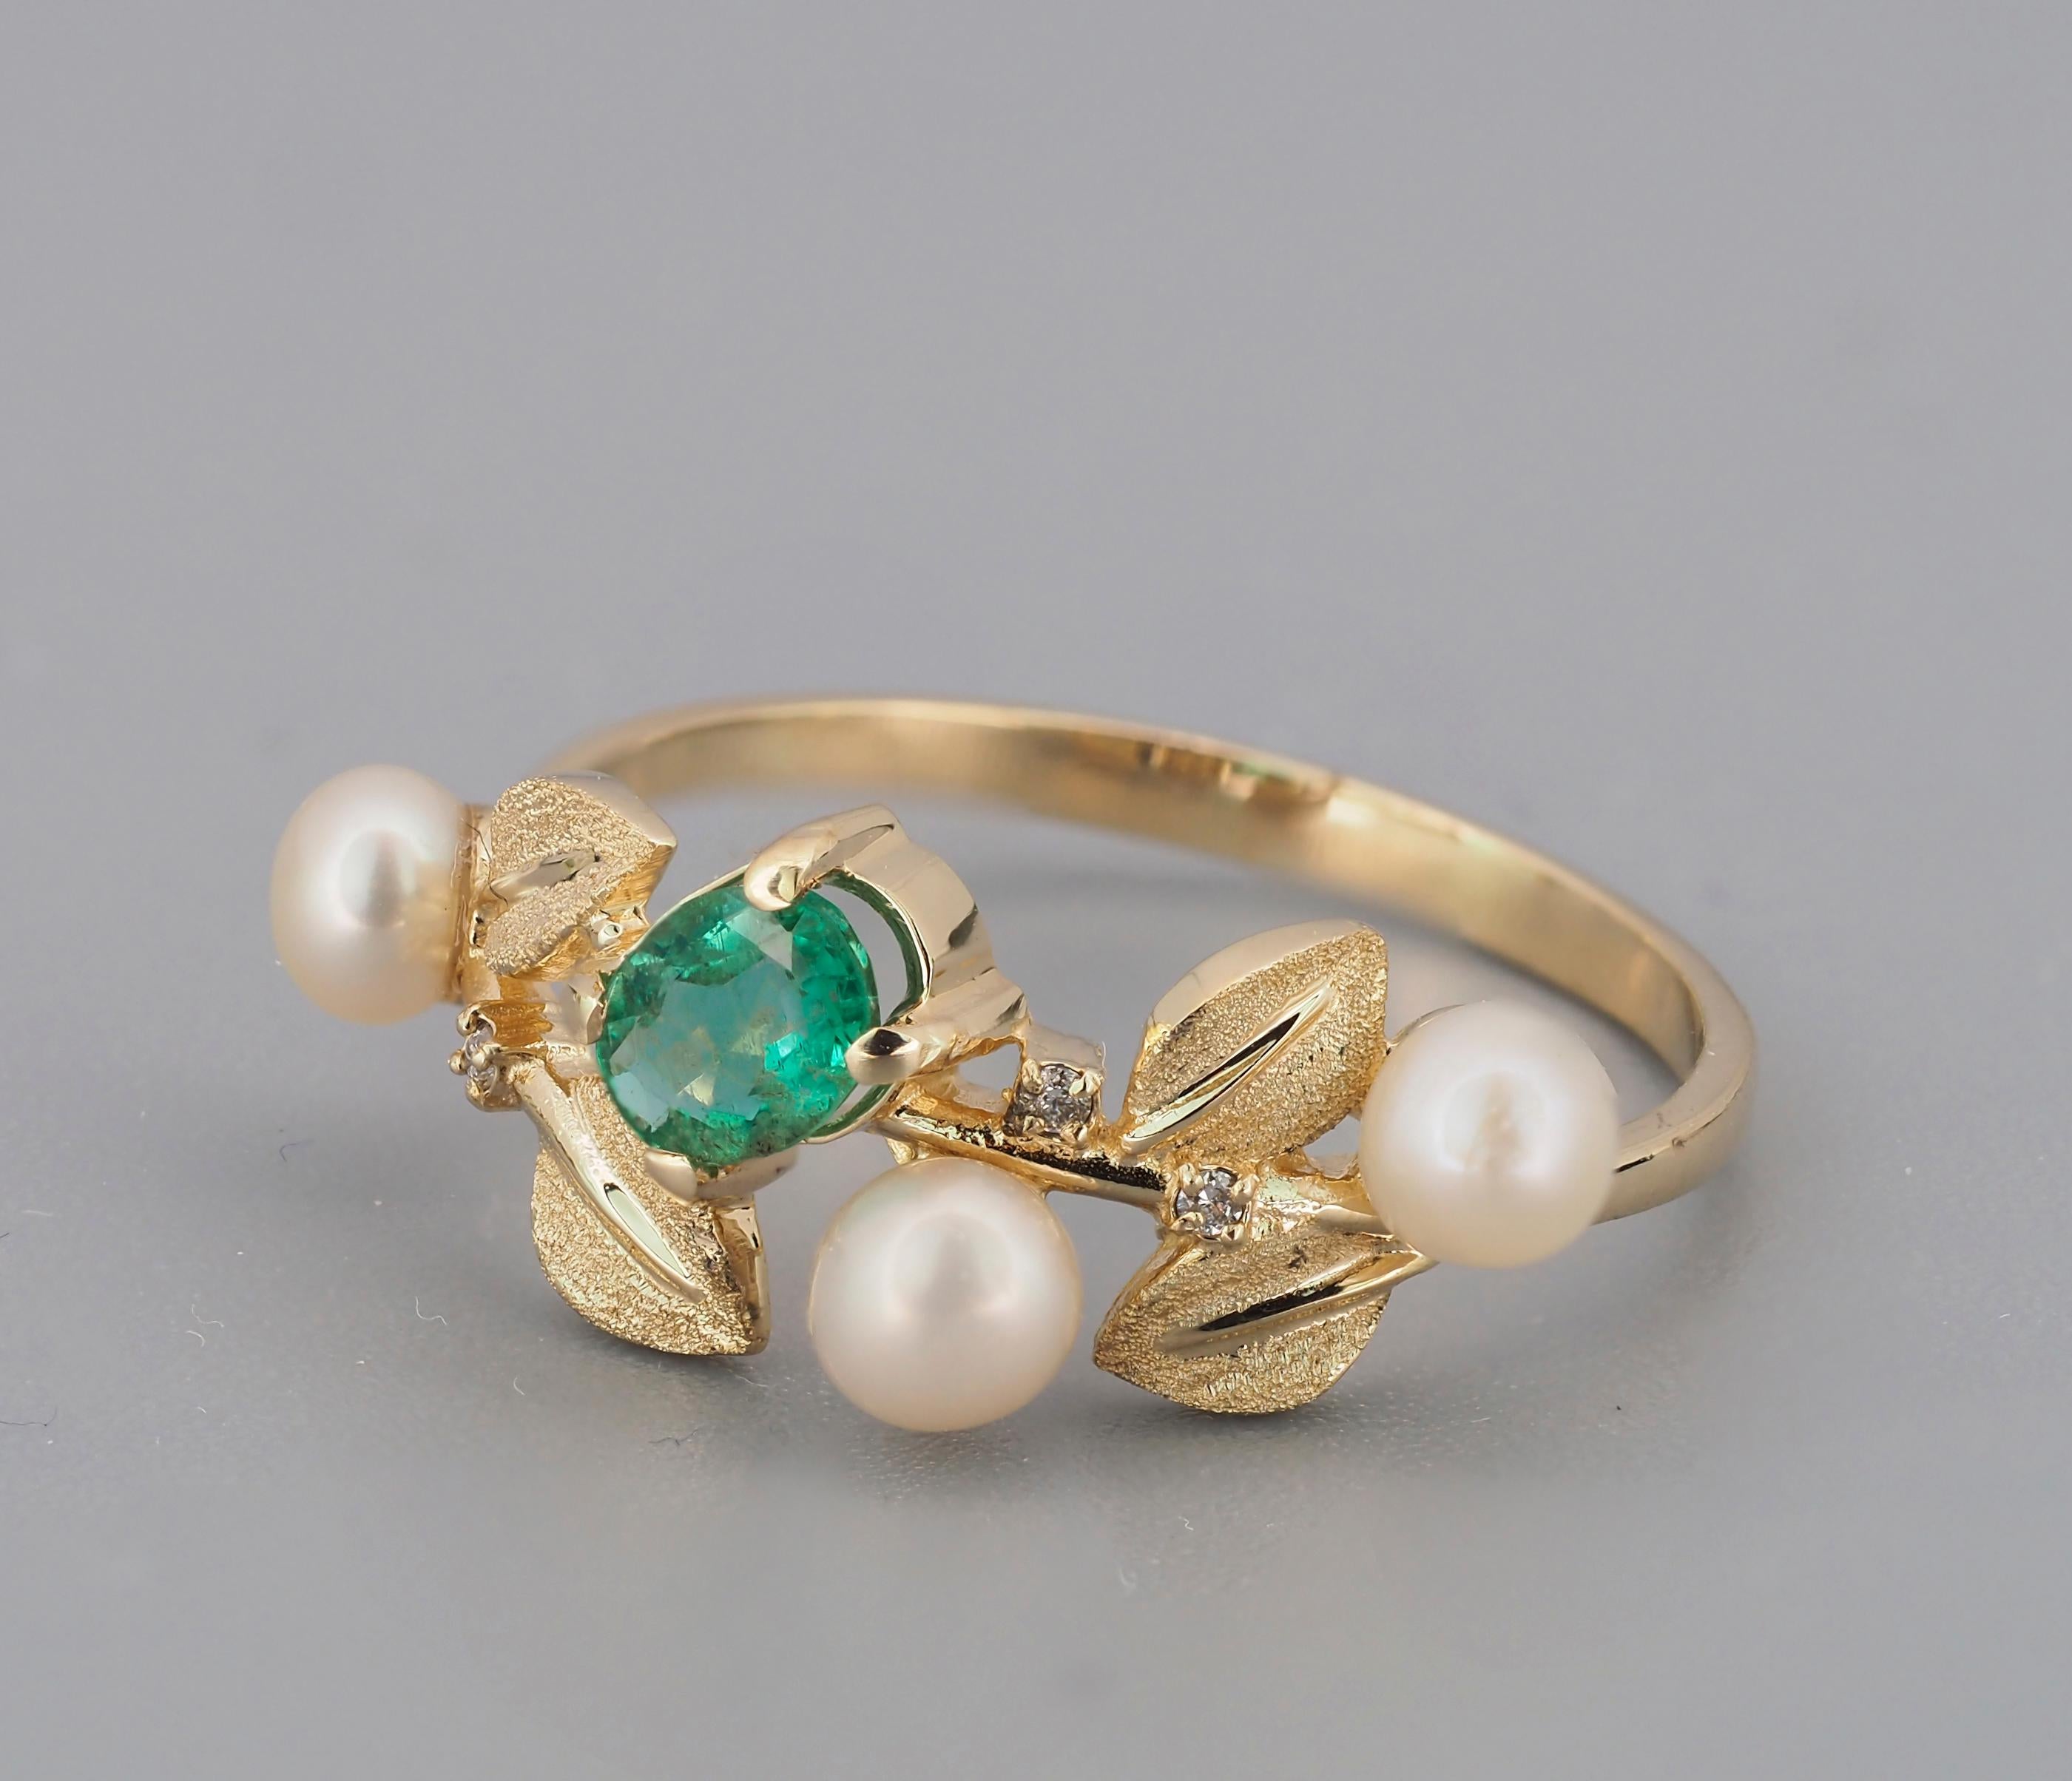 Oval Cut Flower ring with emerald in 14k gold.  For Sale